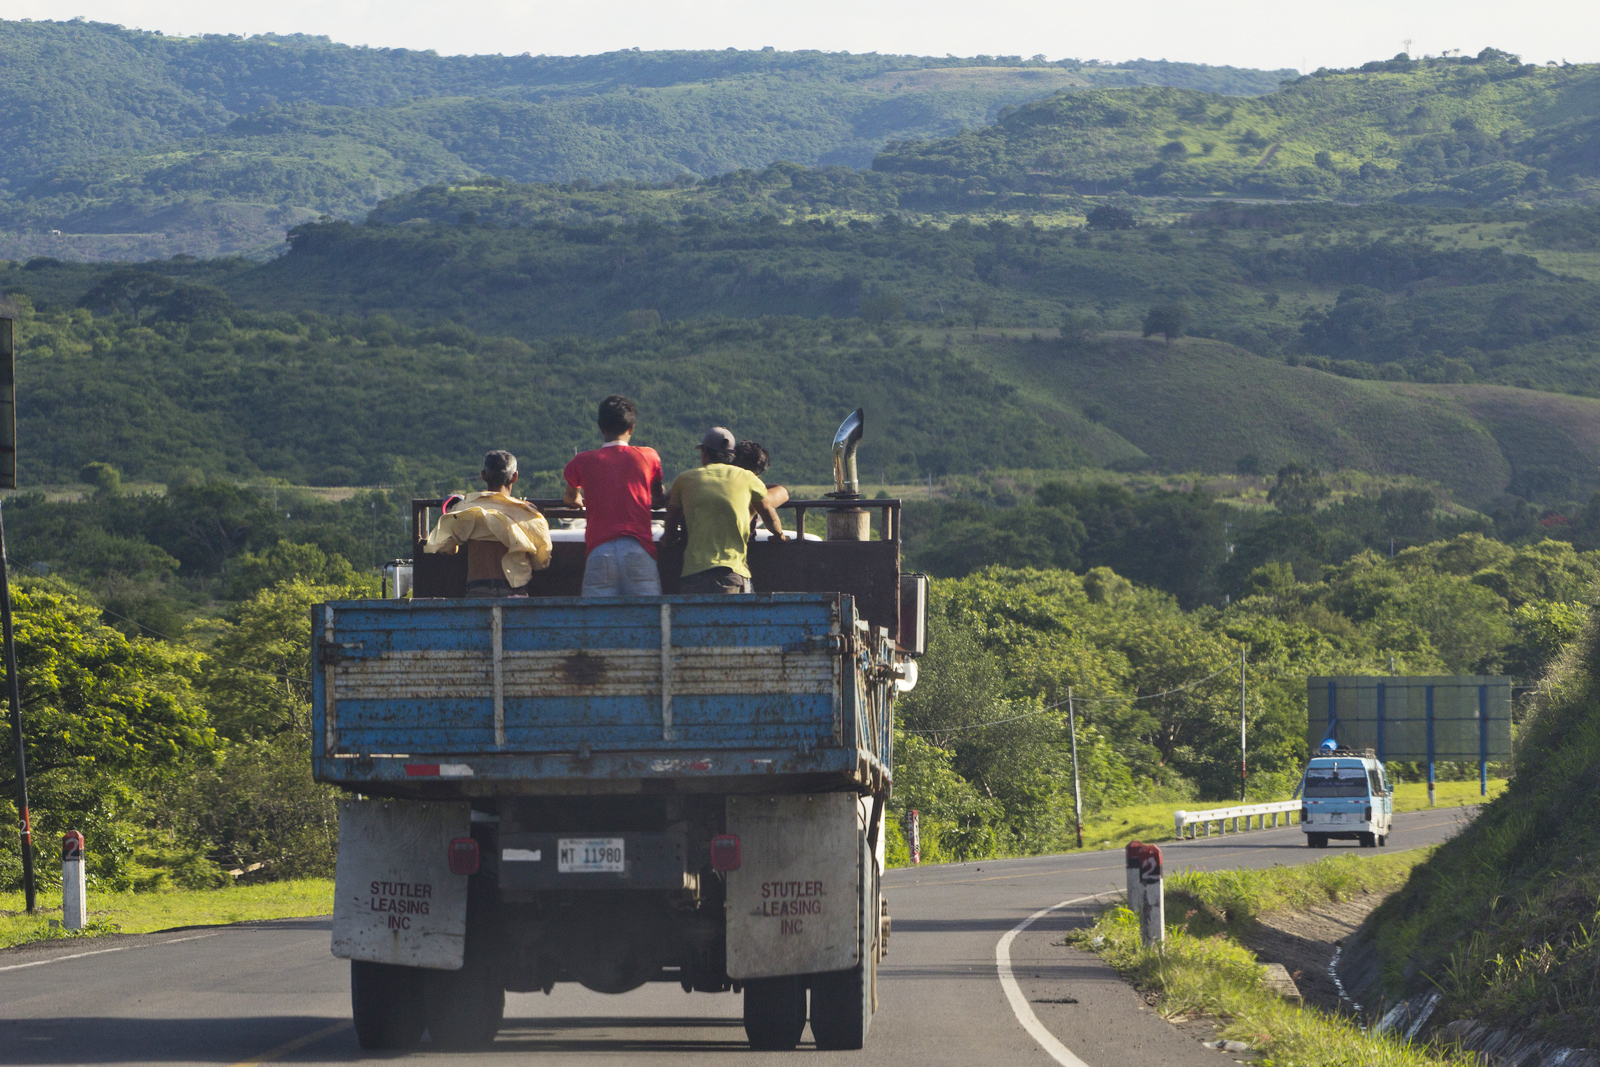 Why invest in Nicaragua, why now?